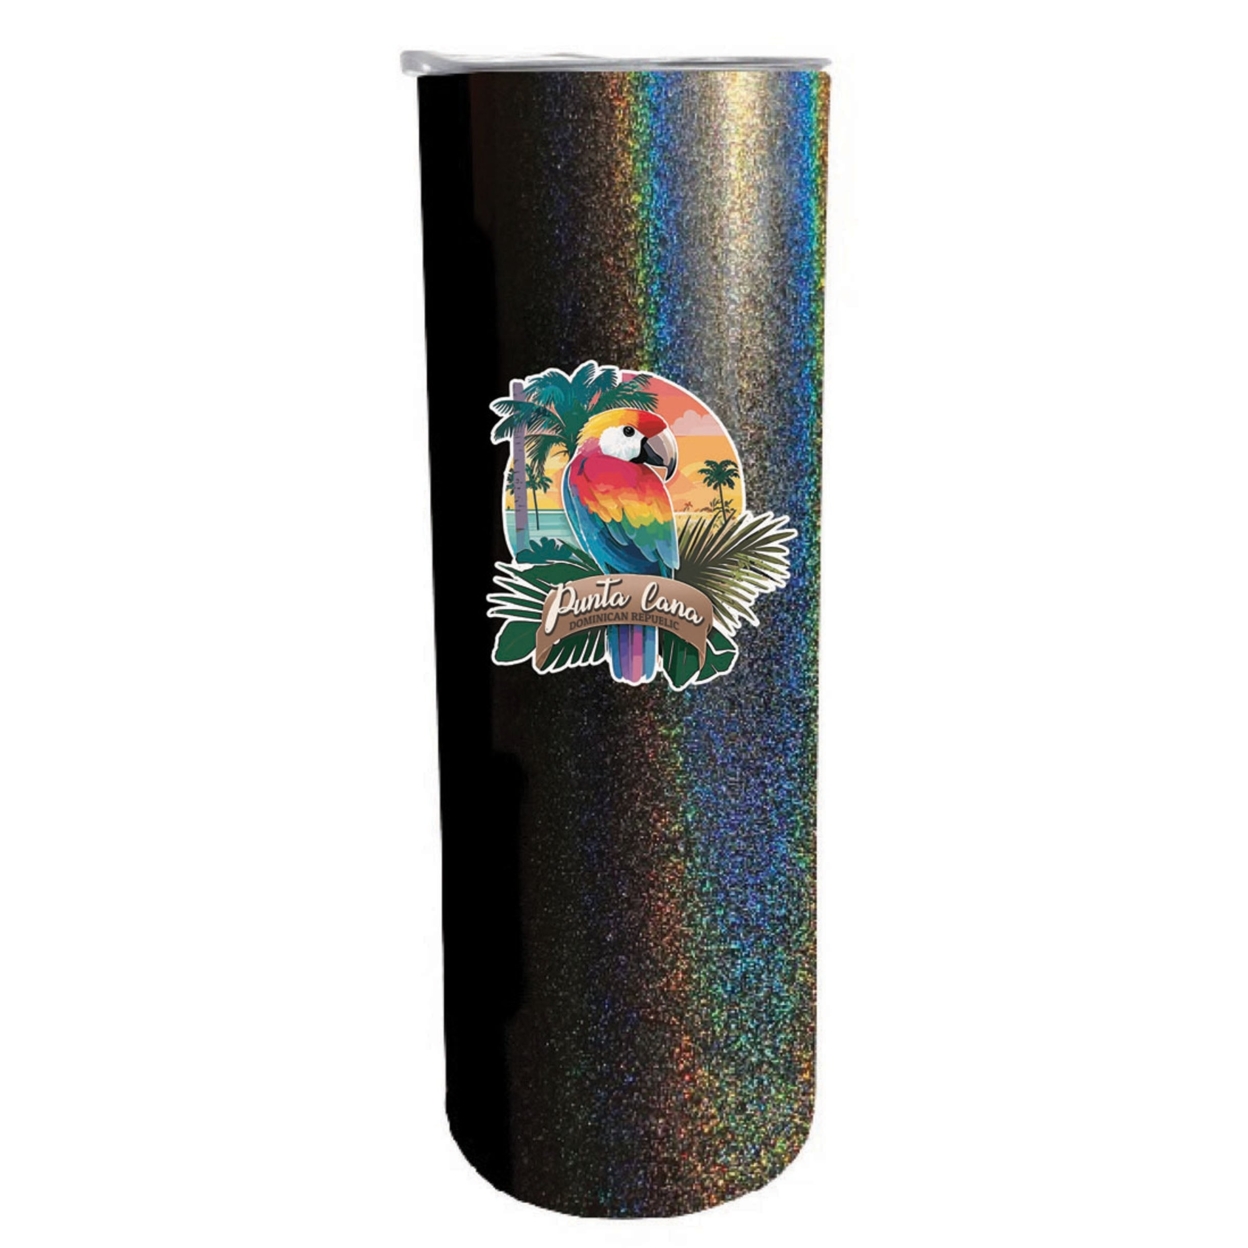 Punta Cana Dominican Republic Souvenir 20 Oz Insulated Stainless Steel Skinny Tumbler - Rainbow Glitter Purple, PARROT